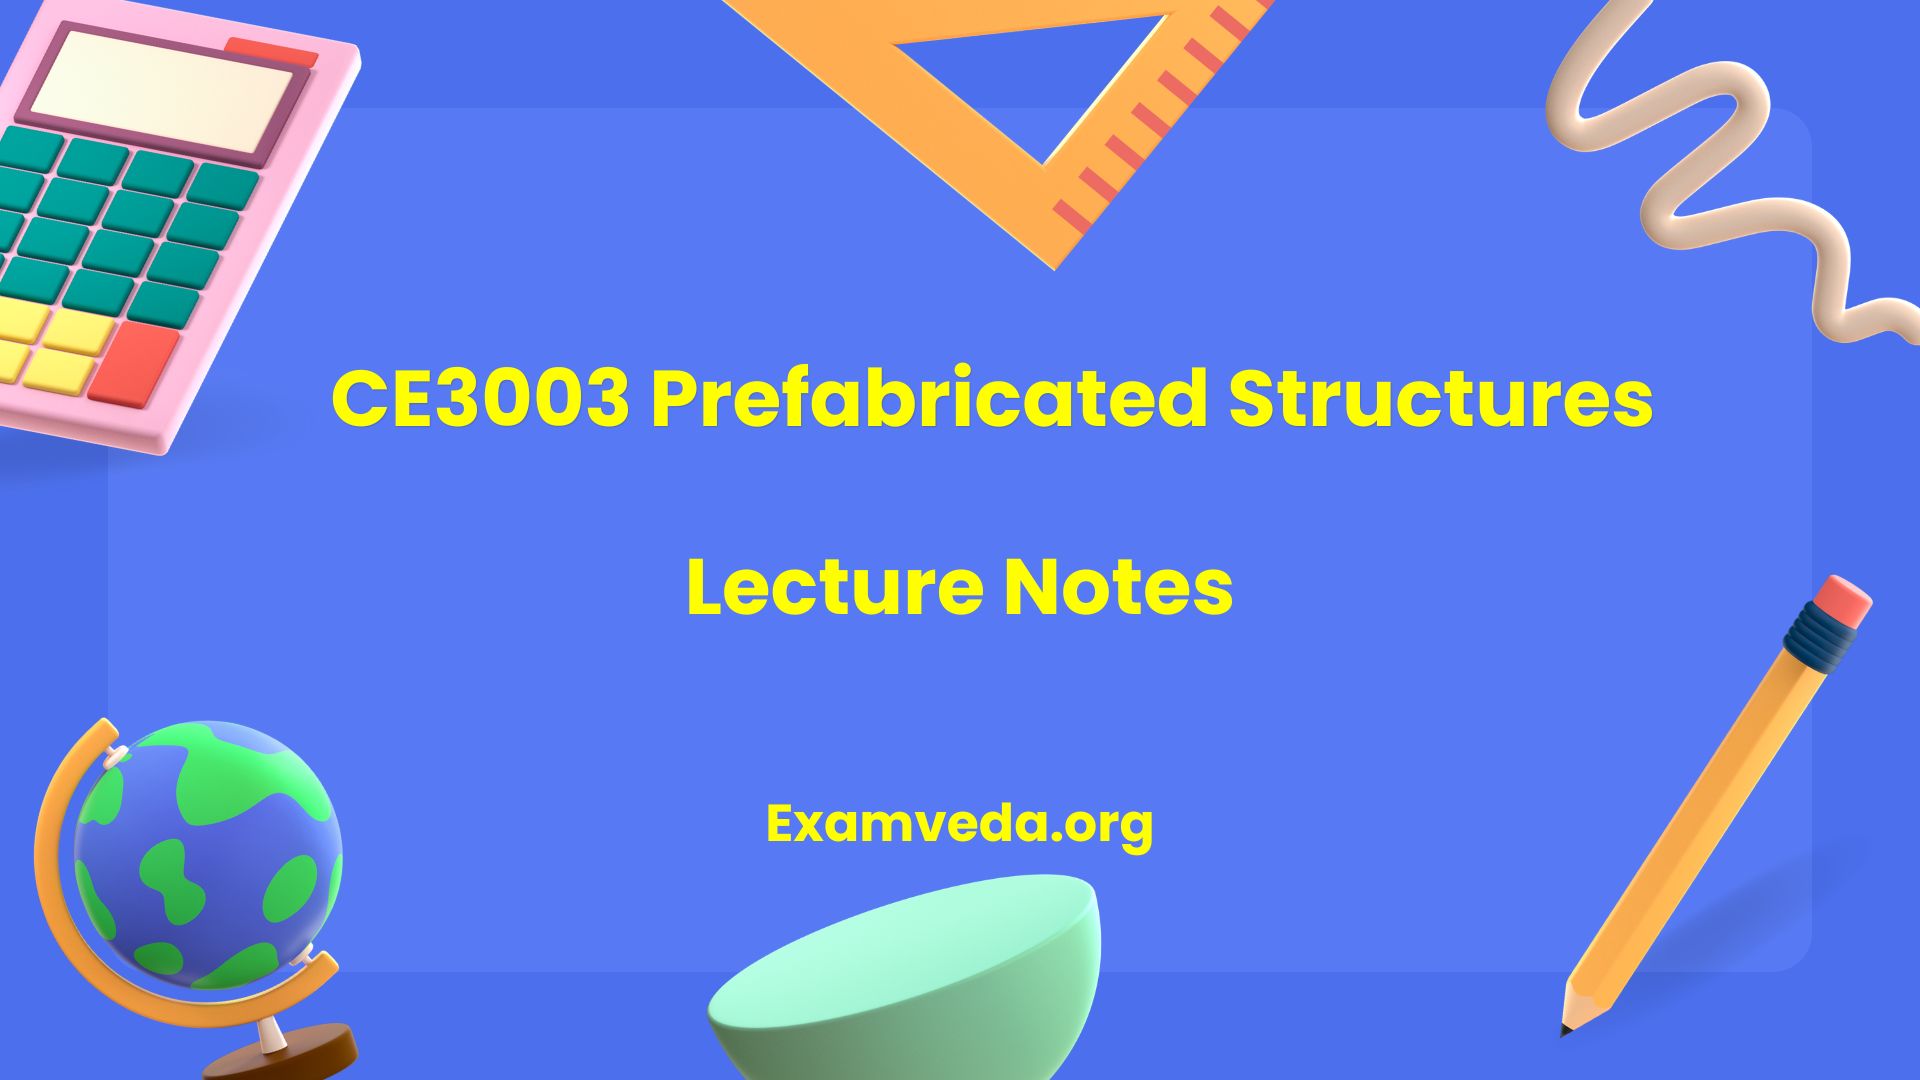 CE3003 Prefabricated Structures Lecture Notes